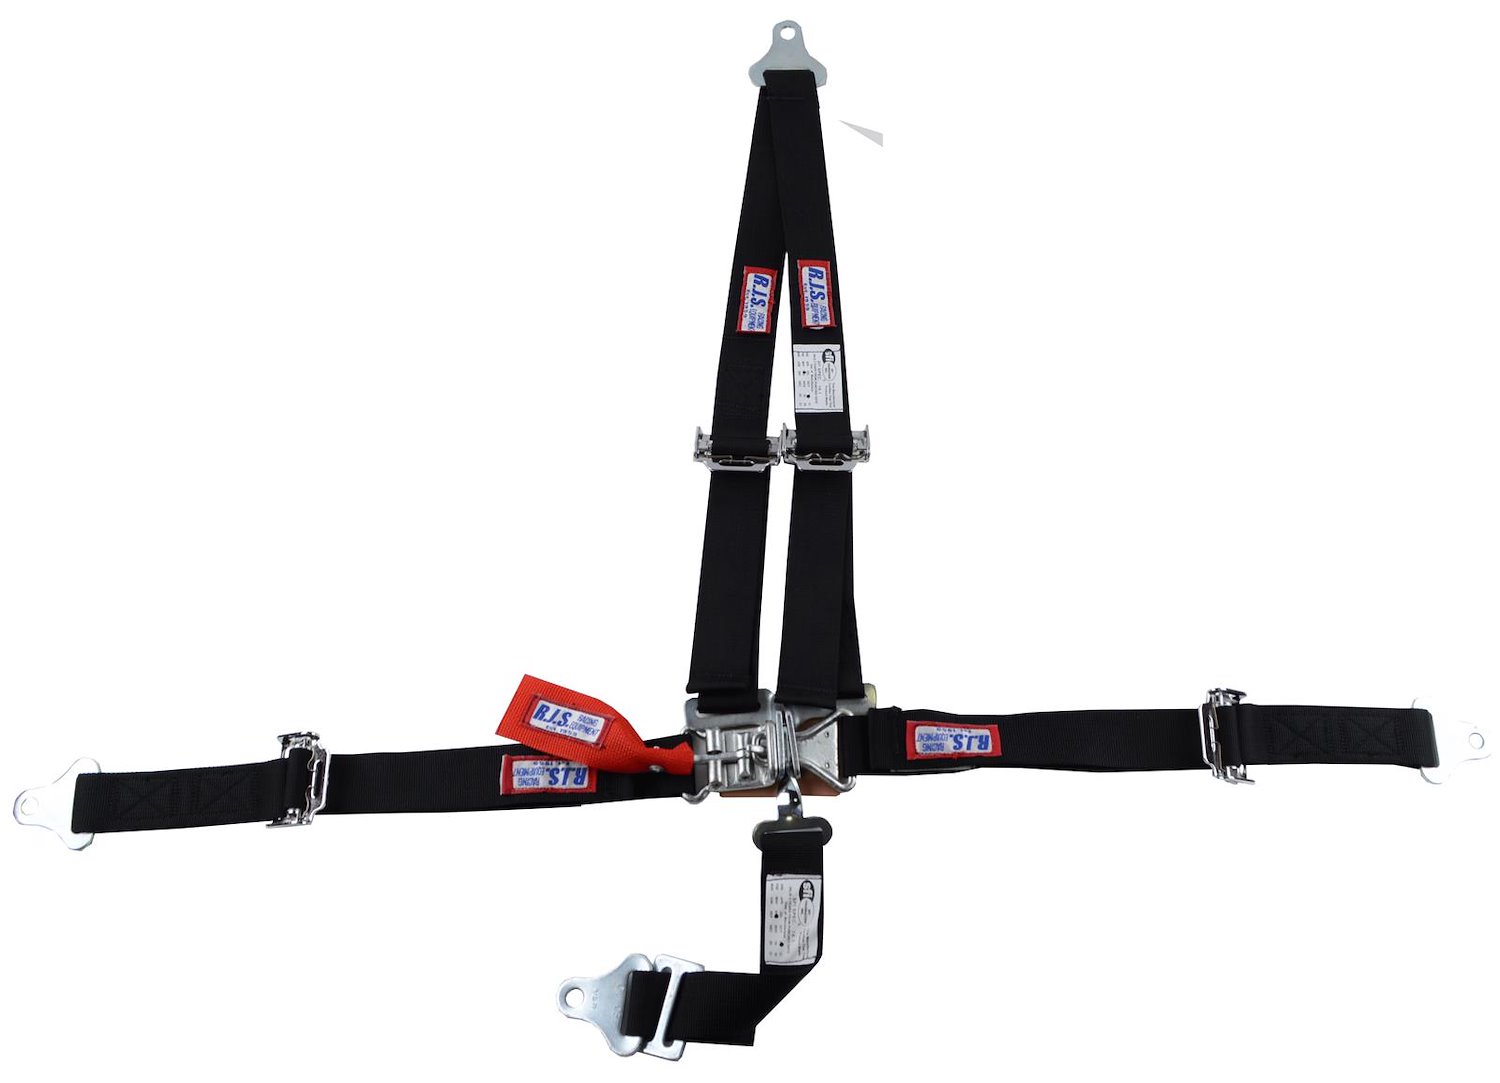 SFI 16.1 CAM-LOCK HARNESS 2 PULL DOWN Lap Belt 2 Shoulder Harness Individual FLOOR Mount 2 SINGLE Sub ALL WRAP ENDS BLUE